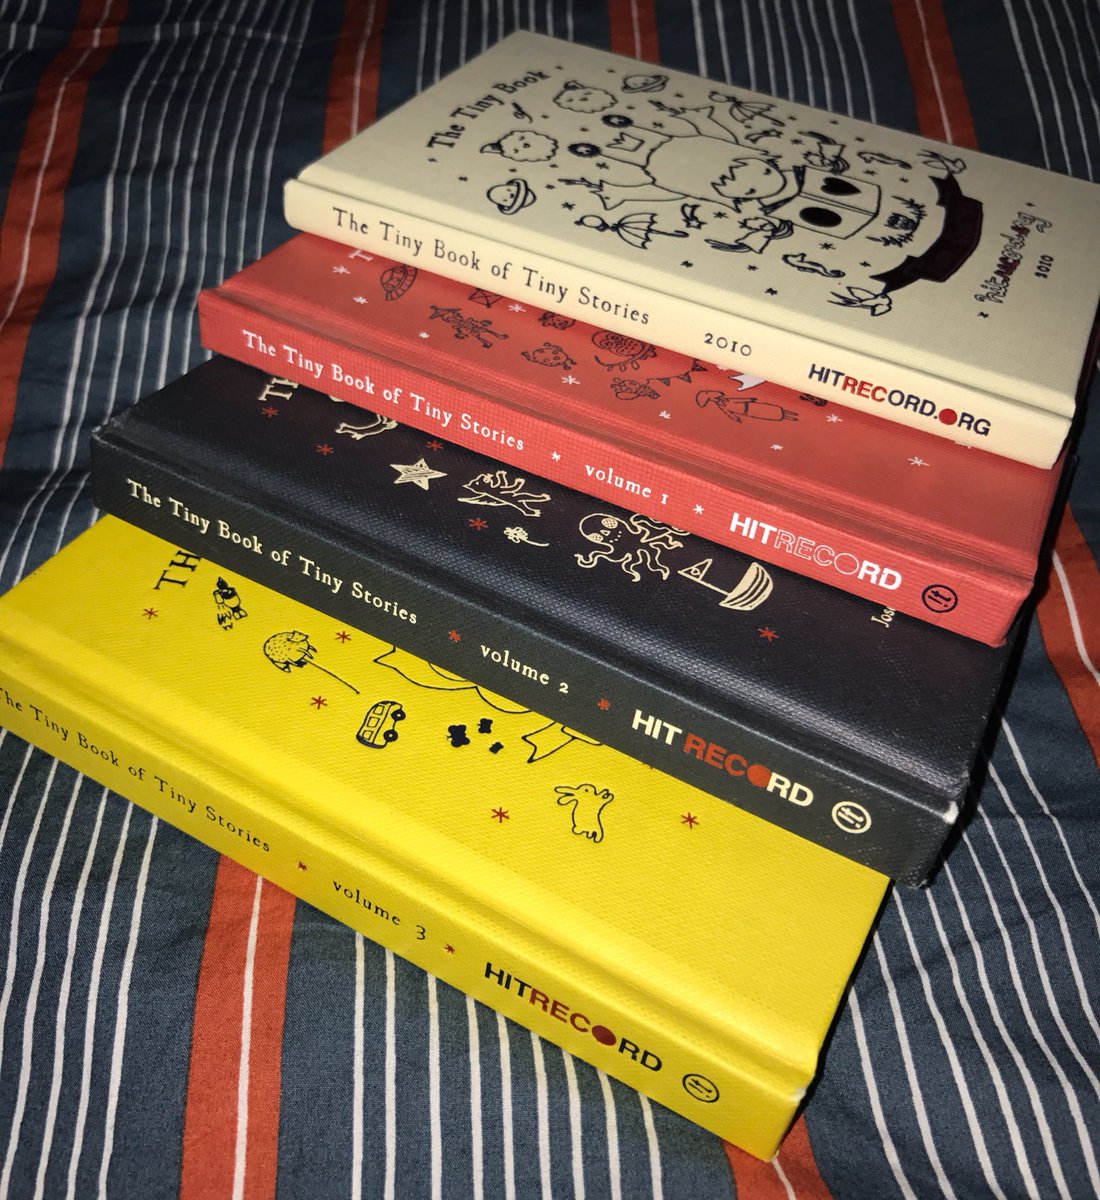 RT @butterfly8871: My collection is complete #tinystories @hitRECordJoe @hitRECord ???? https://t.co/Kd768wyiOv